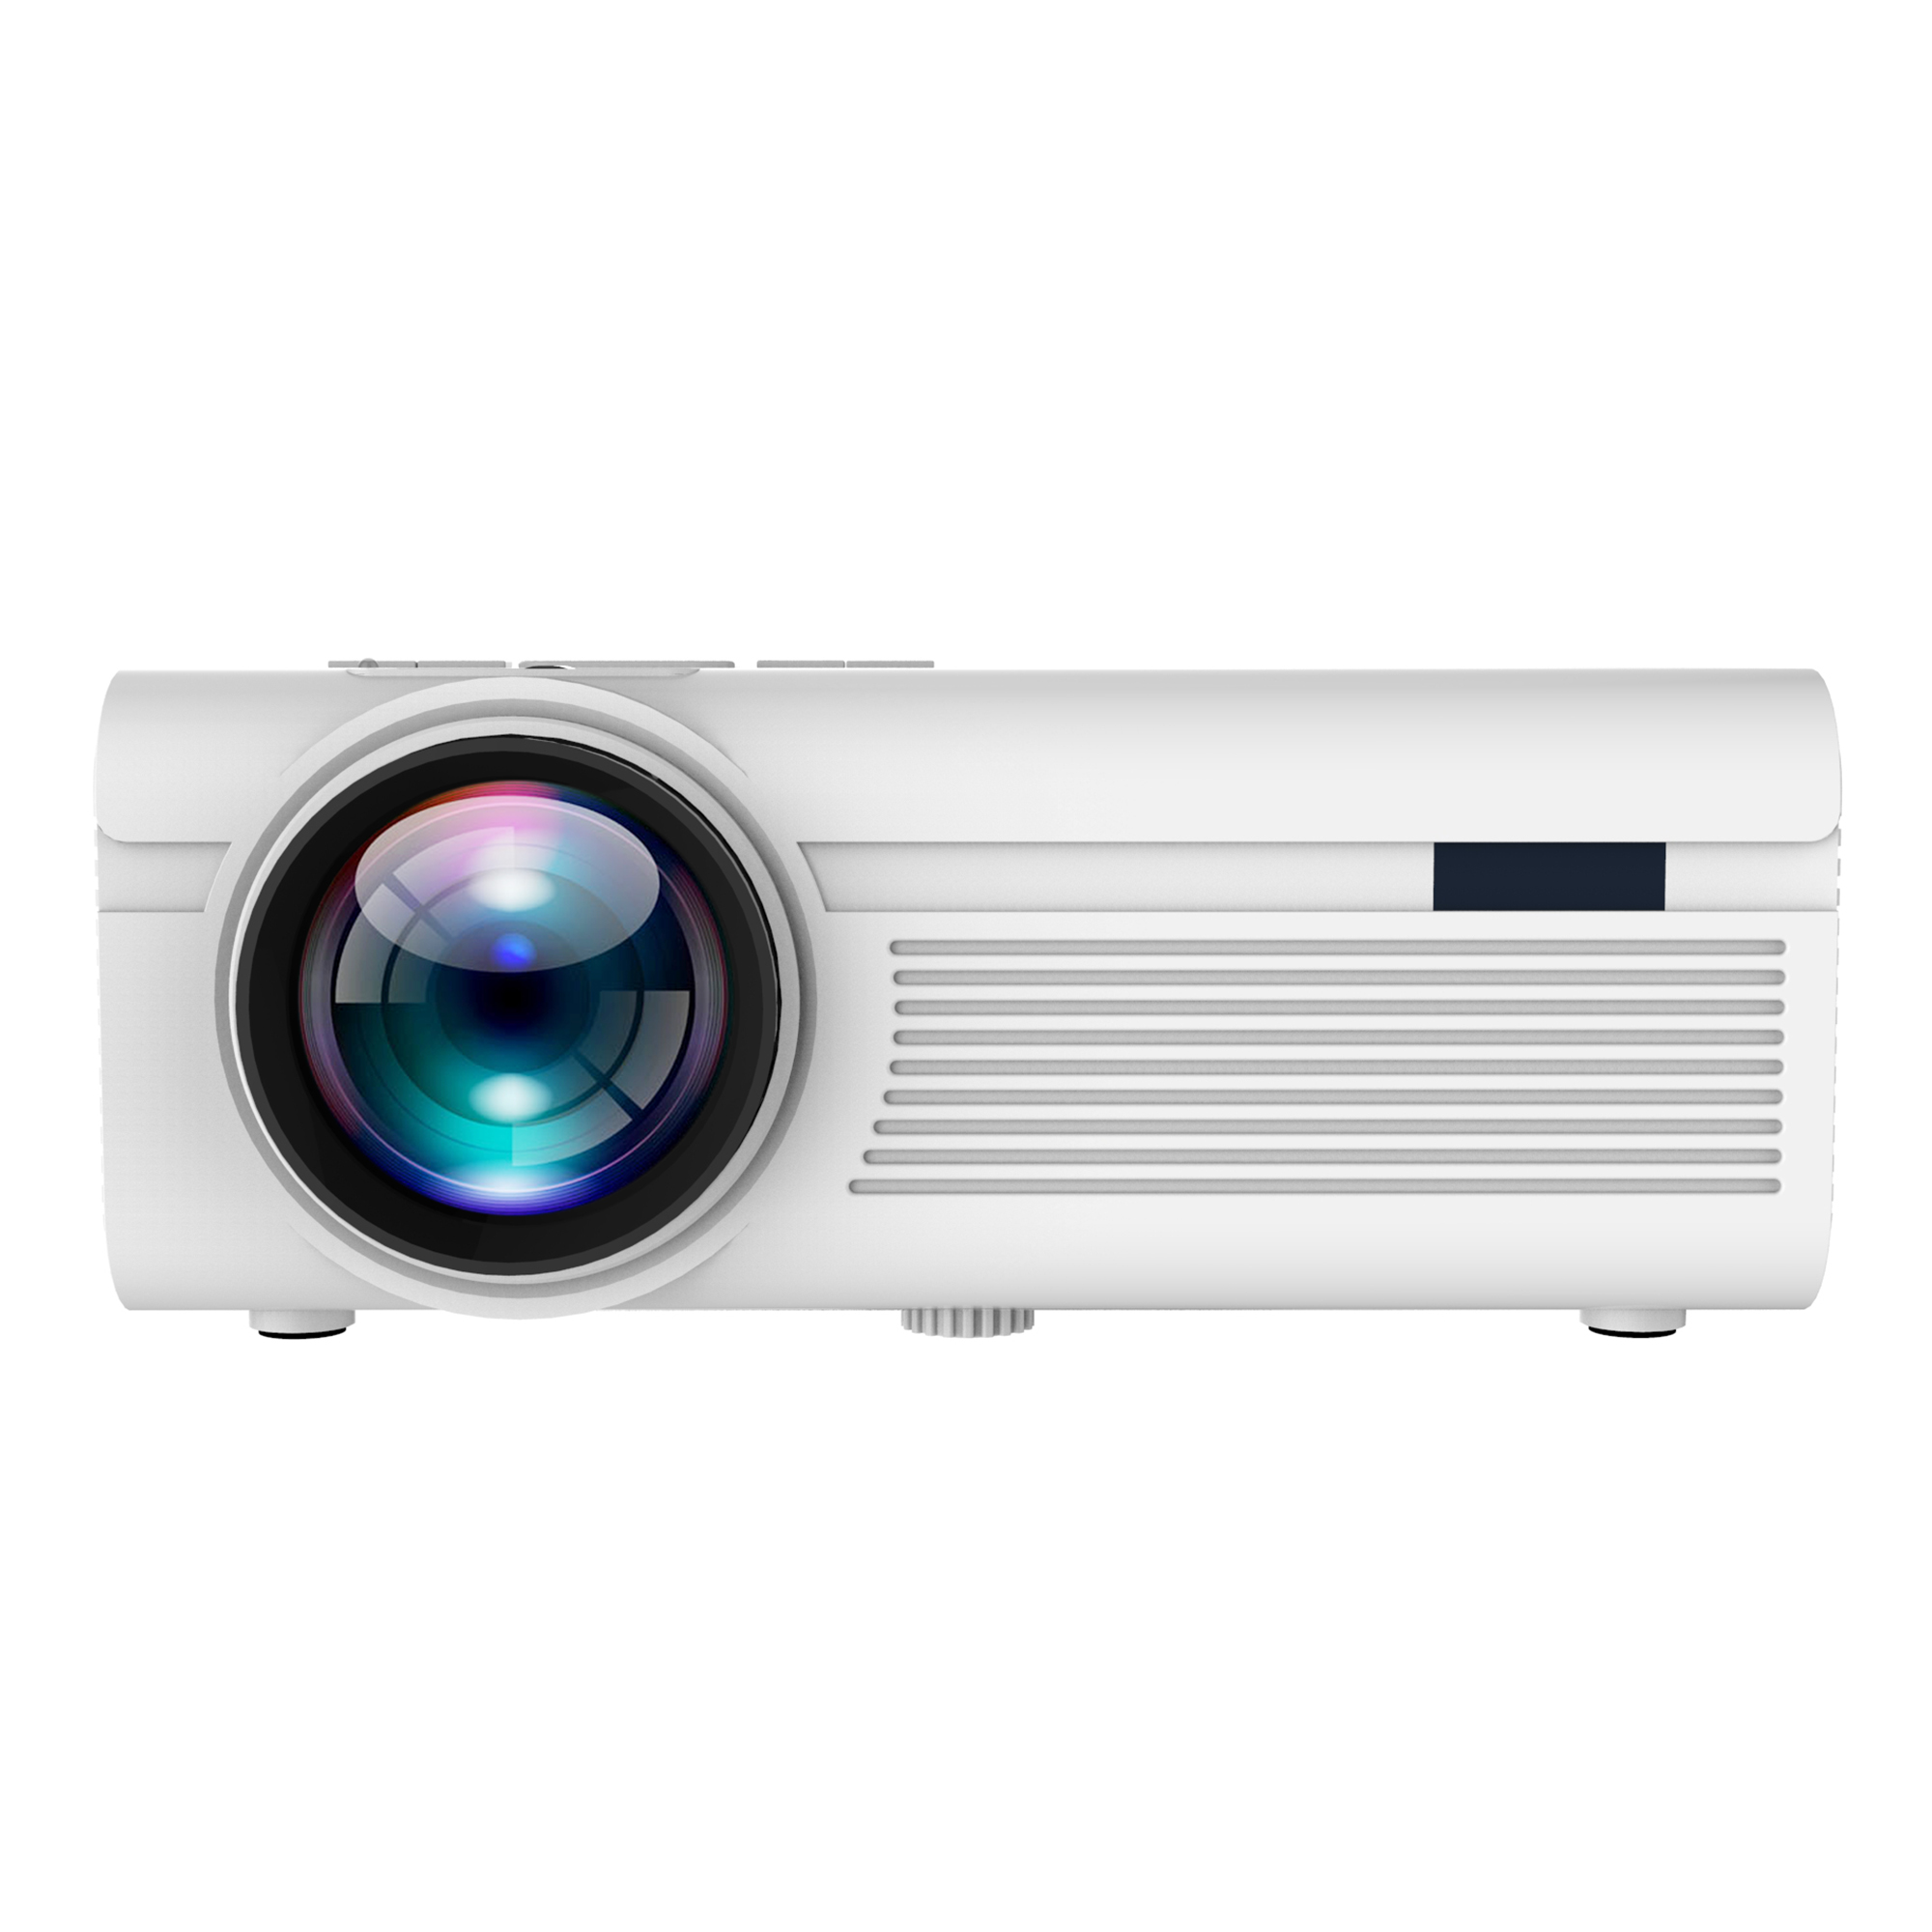 RCA 480P LCD Home Theater Projector - Up to 130" RPJ136, 1.5 LB, White - image 1 of 16